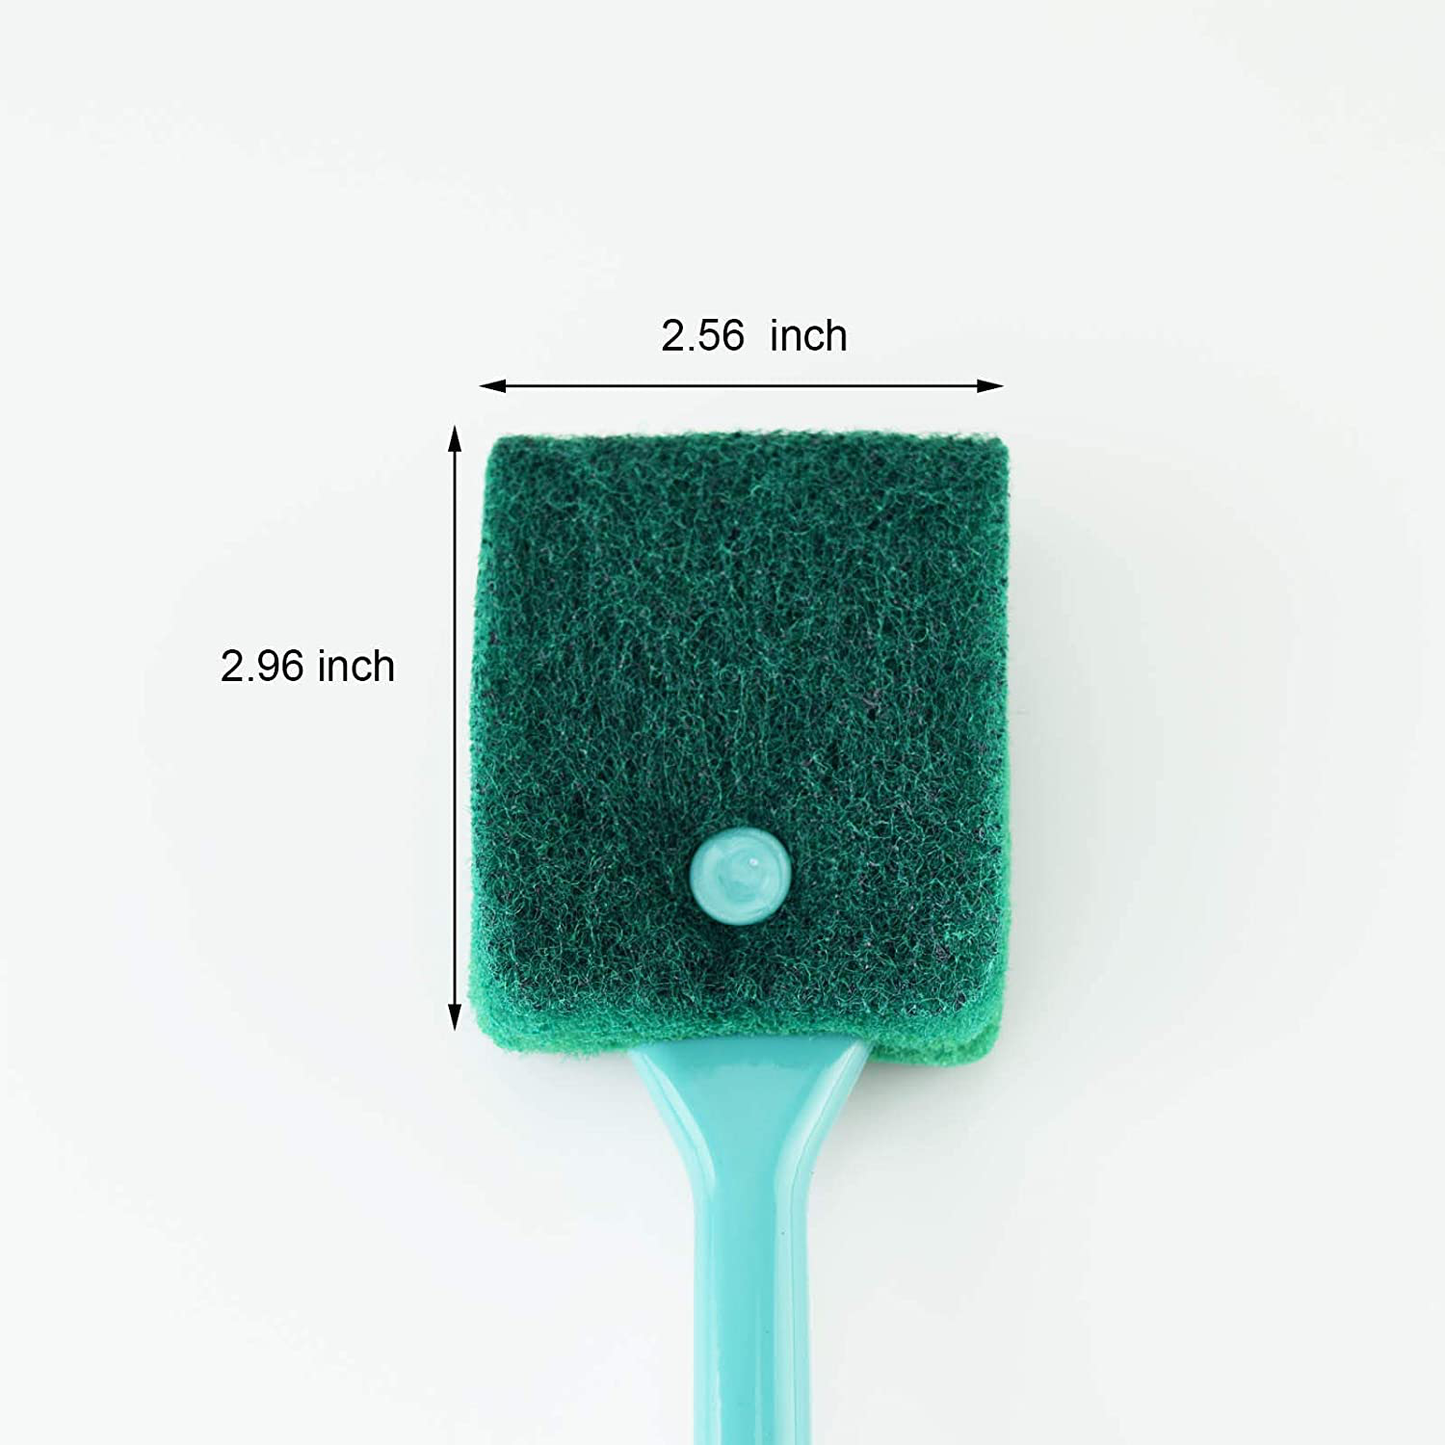 AOODOOM 3 PCS Double-Sided Aquarium Fish Tank Algae Cleaning Brush with Non-Slip Handle, Sponge Scrubber Cleaner for Glass Aquariums and Home Kitchen Animals & Pet Supplies > Pet Supplies > Fish Supplies > Aquarium Cleaning Supplies AOODOOM   